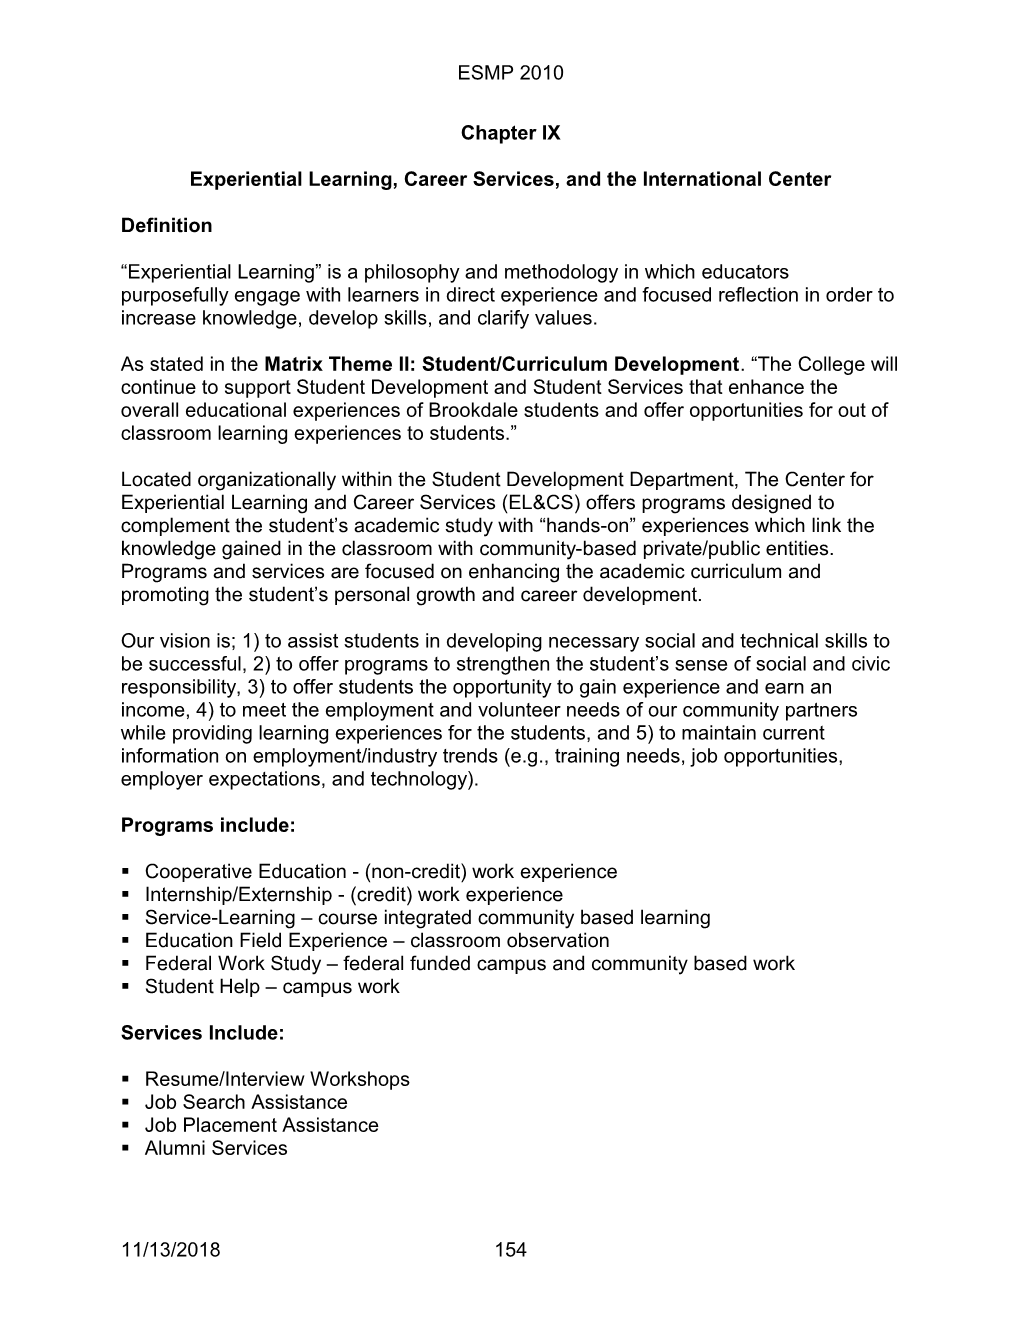 Experiential Learning, Career Services, and the Internationalcenter